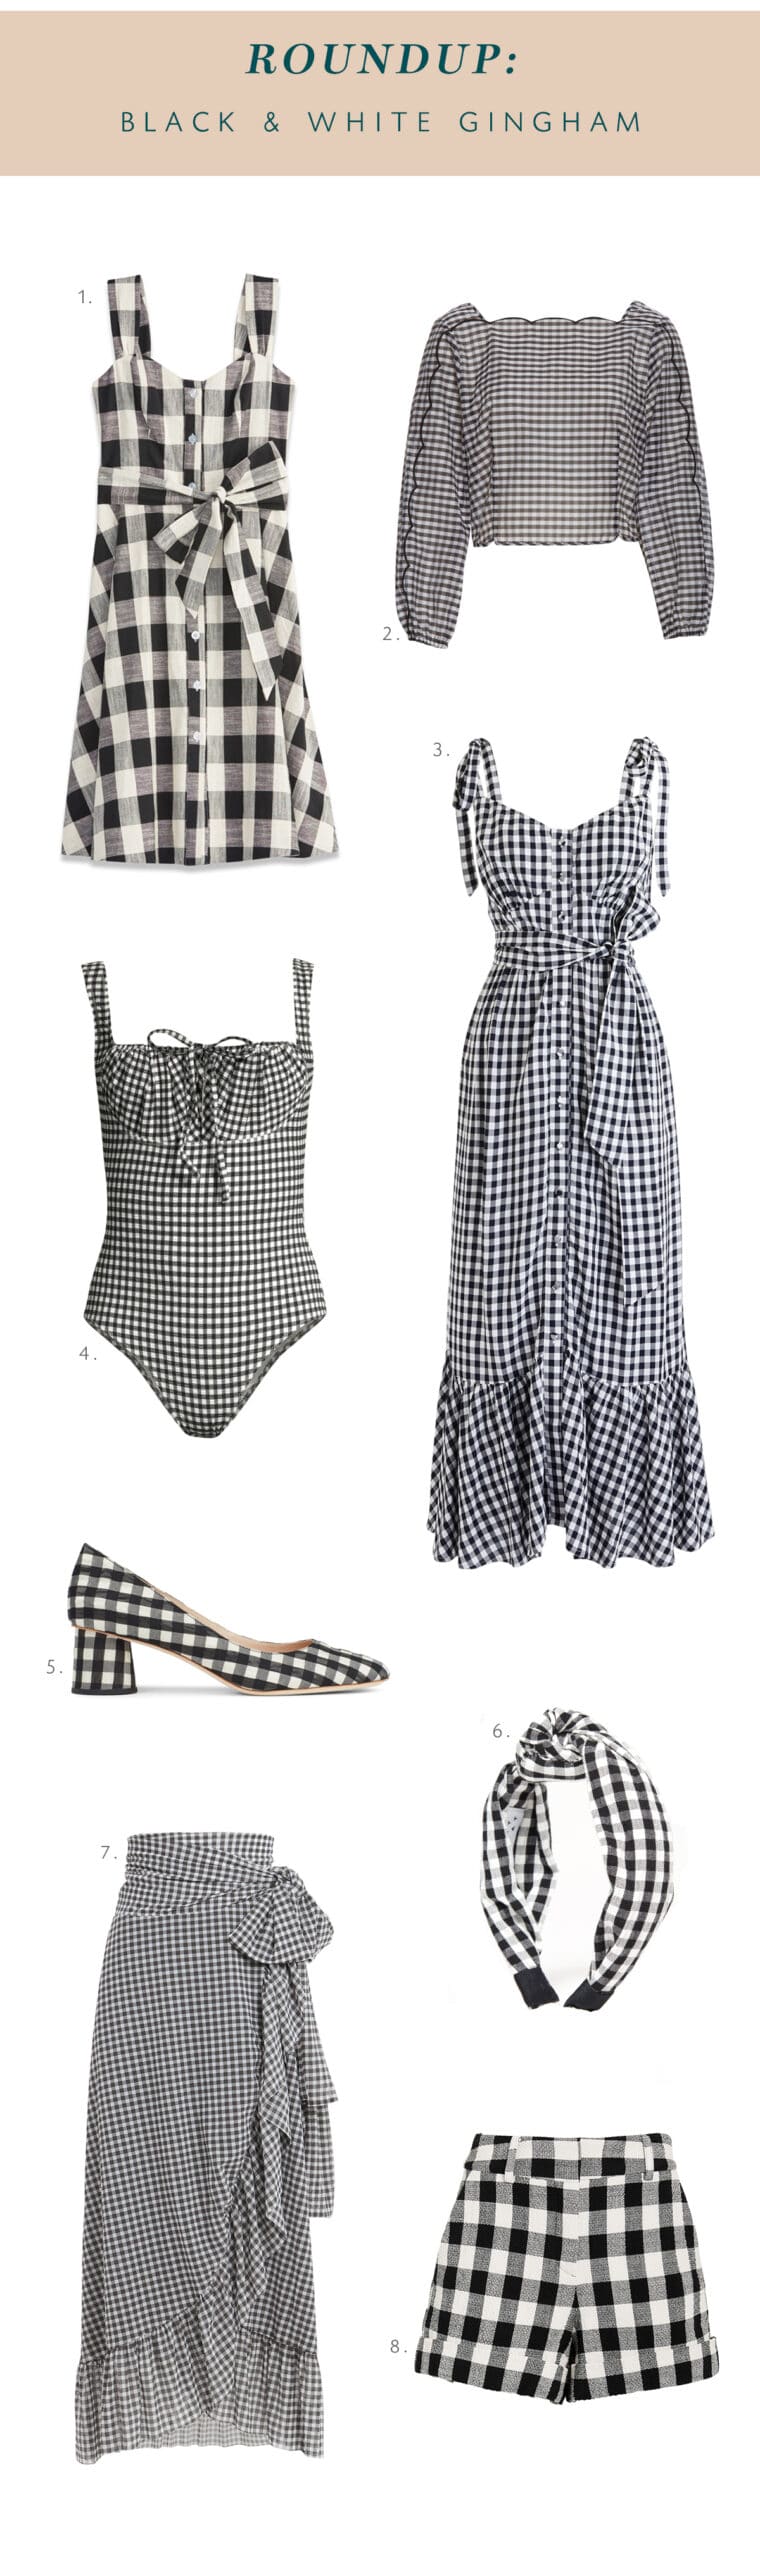 black-and-white-gingham-picks-for-summer-coco-kelley